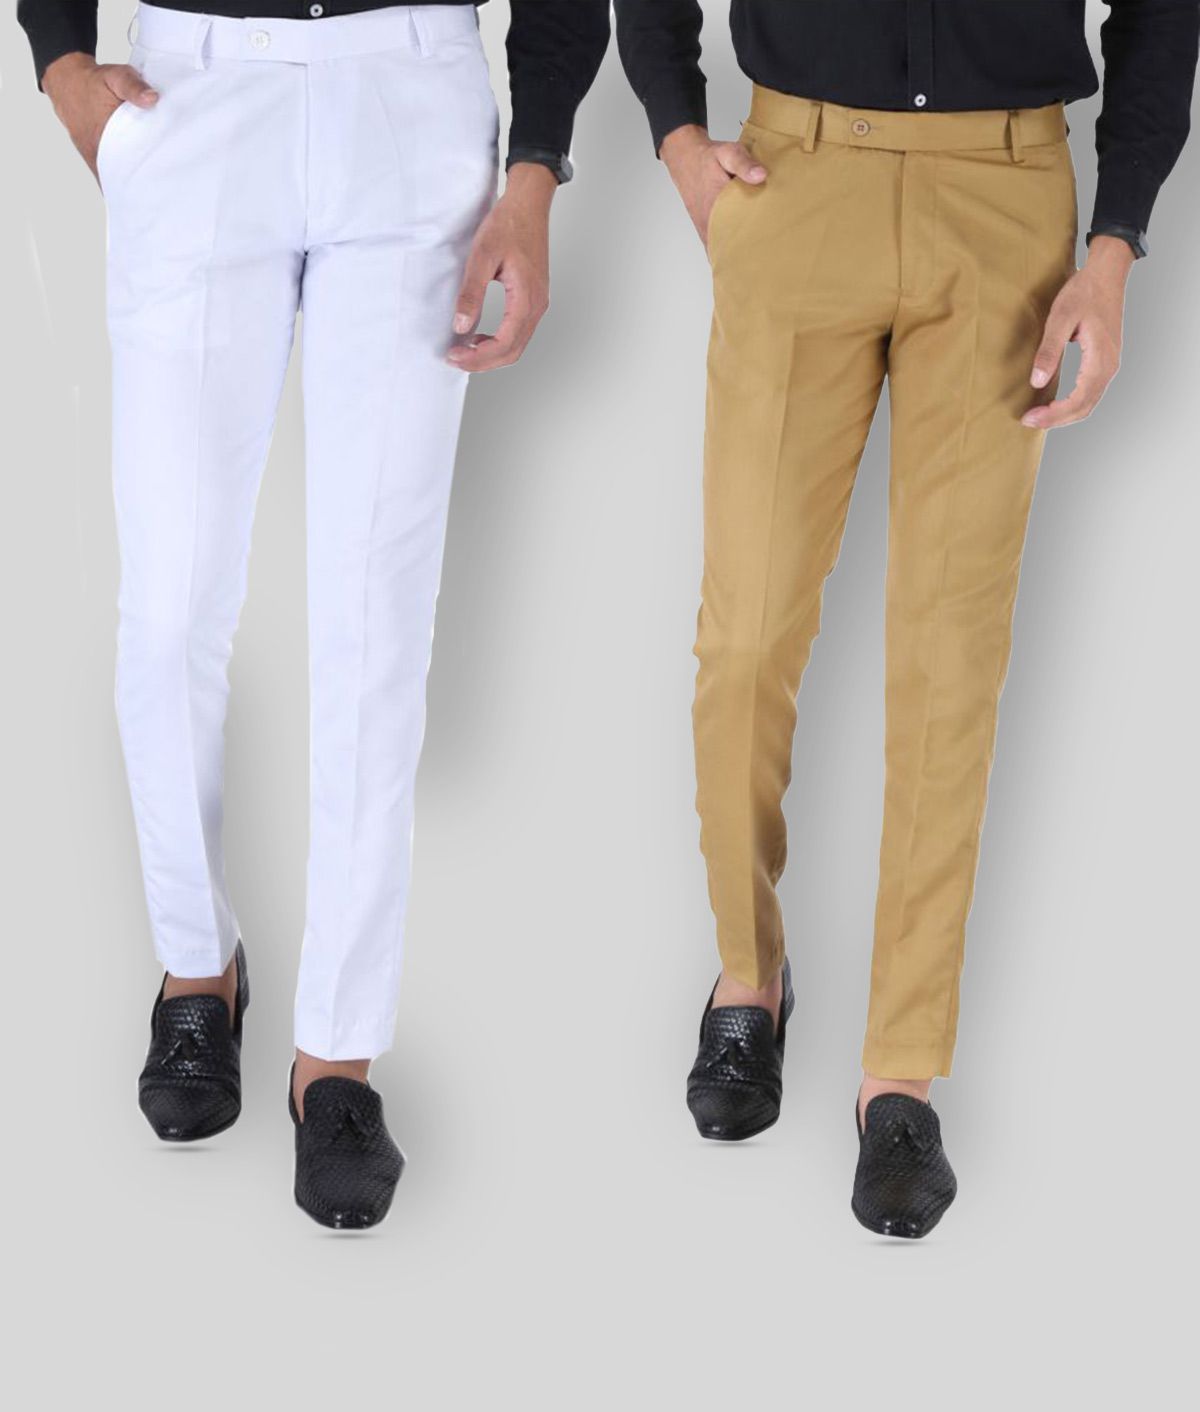     			SREY - White Polycotton Slim - Fit Men's Trousers ( Pack of 2 )